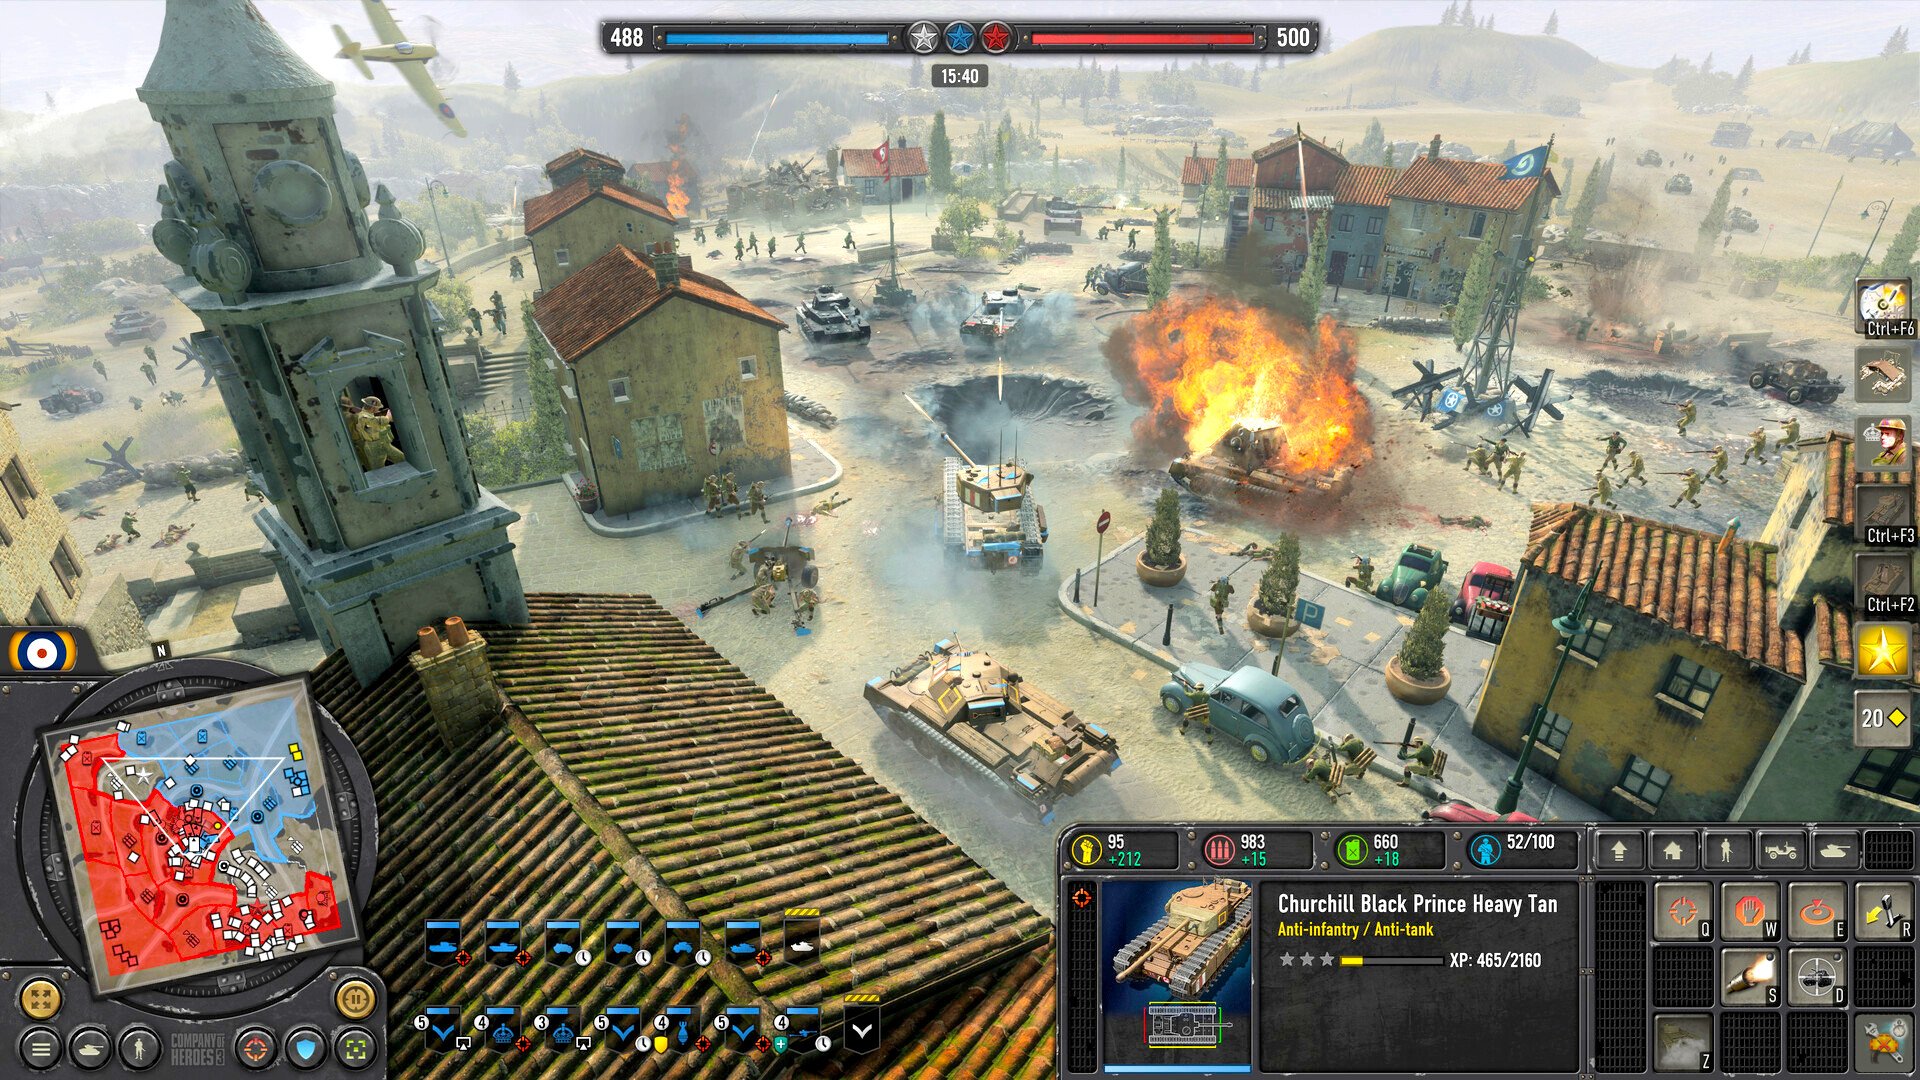 Best ww2 games guide - SEGA sales screenshot from in game footage of Company of Heroes showing a tank and infantry battle in a sandy village with a church roof and belltower